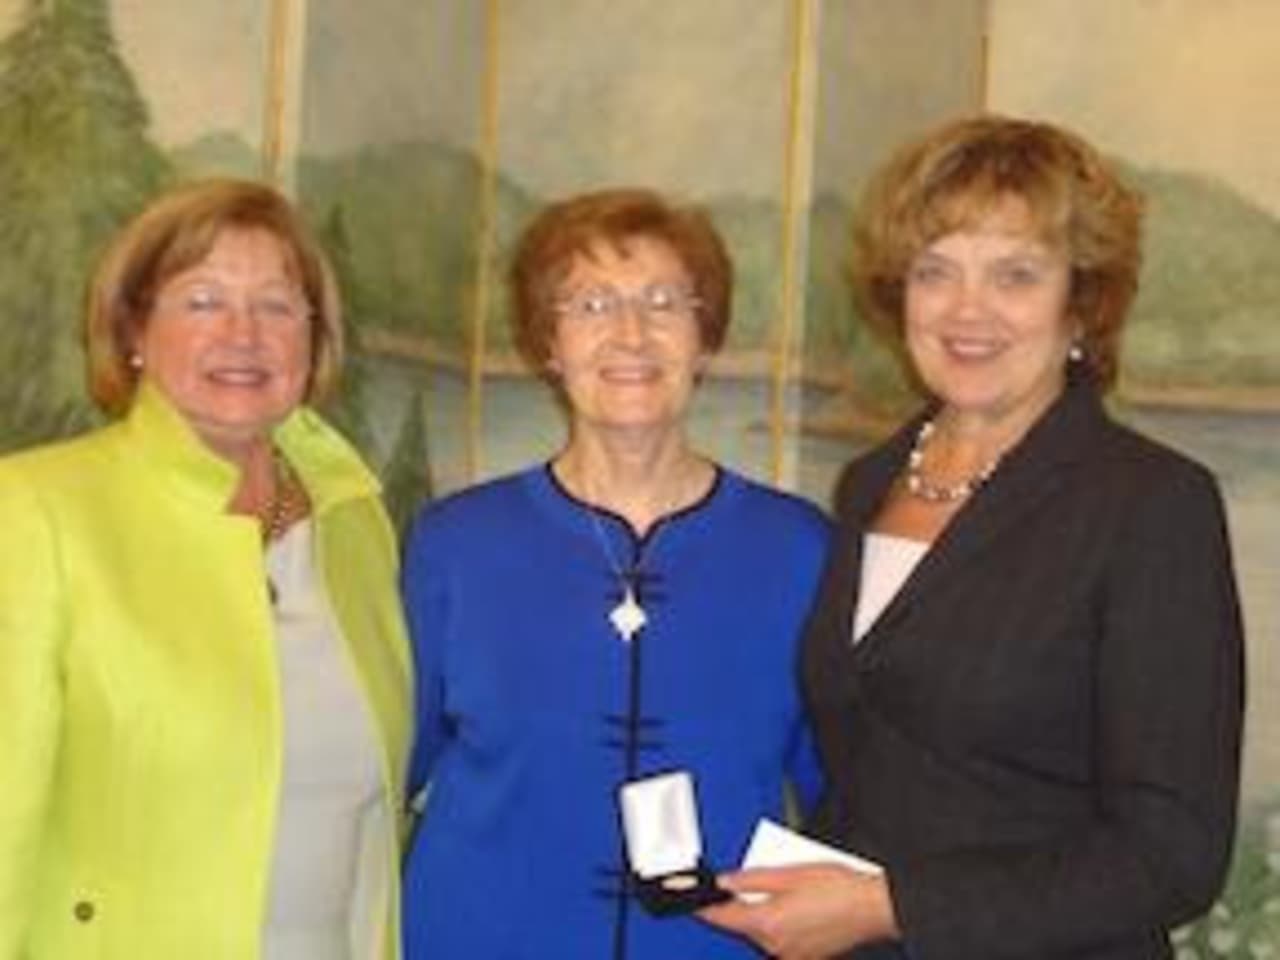 Pennsylvania officials recently honored Sister Janice McLaughlin, president of Ossinings Maryknoll Sisters.